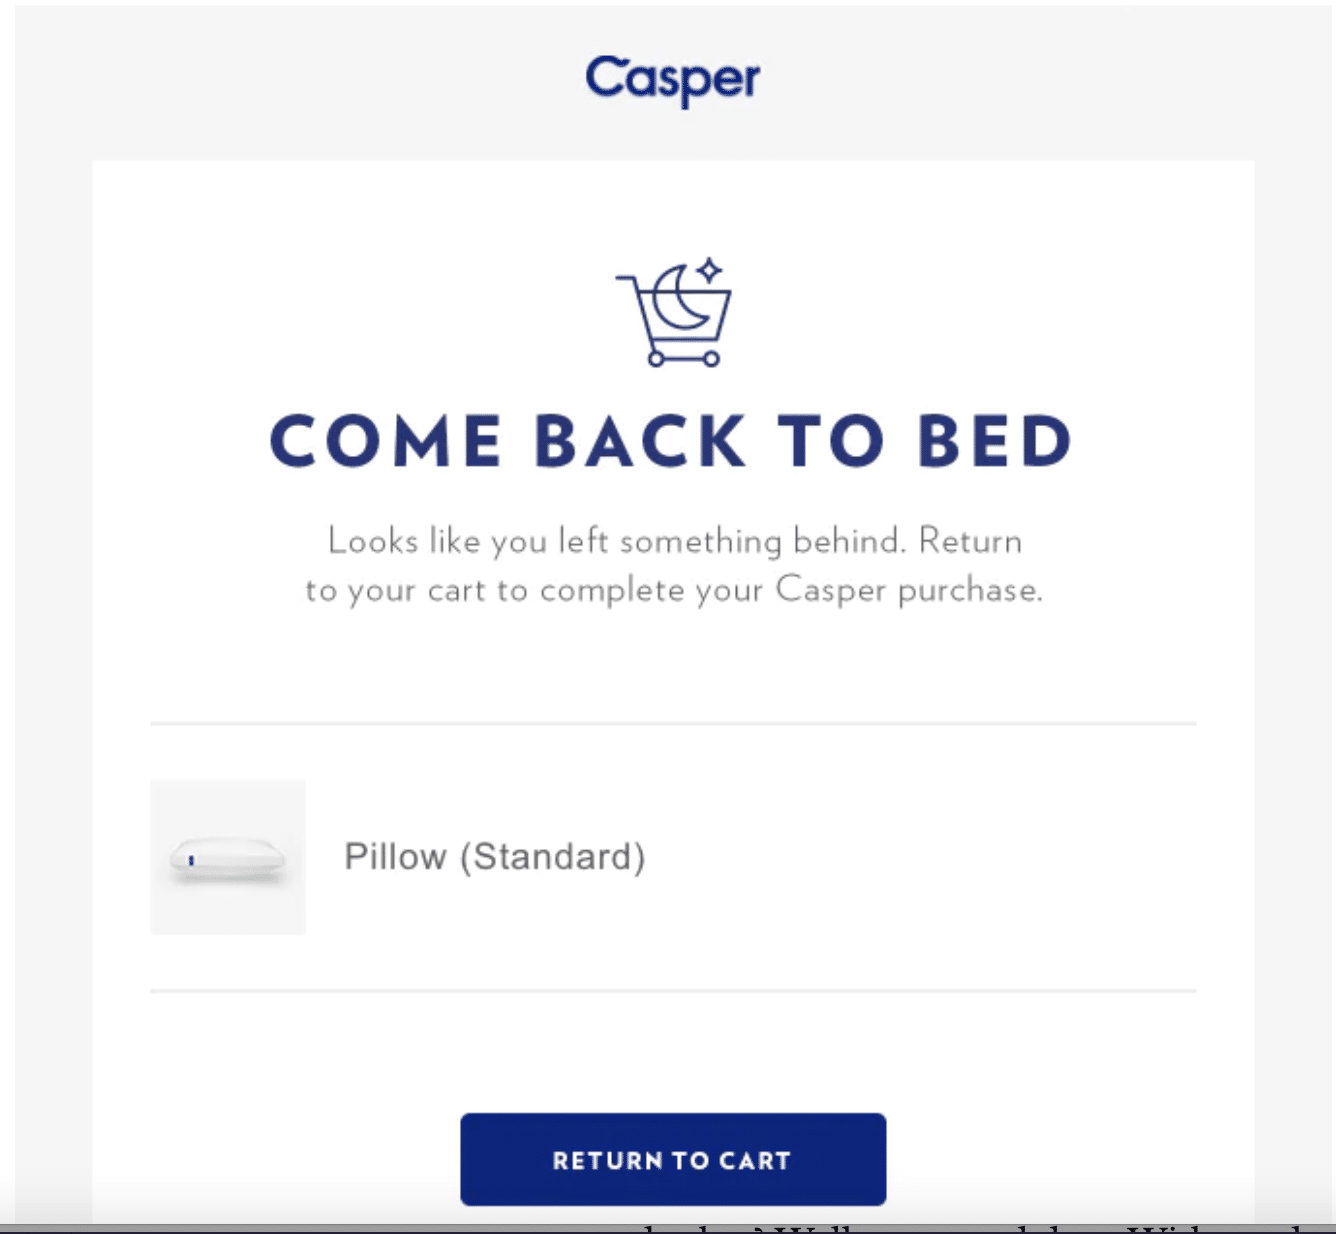 Image shows an abandoned cart email from Casper, an American mattress provider. The headline is ‘come back to bed’ with a picture of a moon in a shopping cart. The sub-header says, ‘looks like you left something behind. Return to your cart to complete your Casper purchase’. A navy blue CTA button states ‘return to cart’